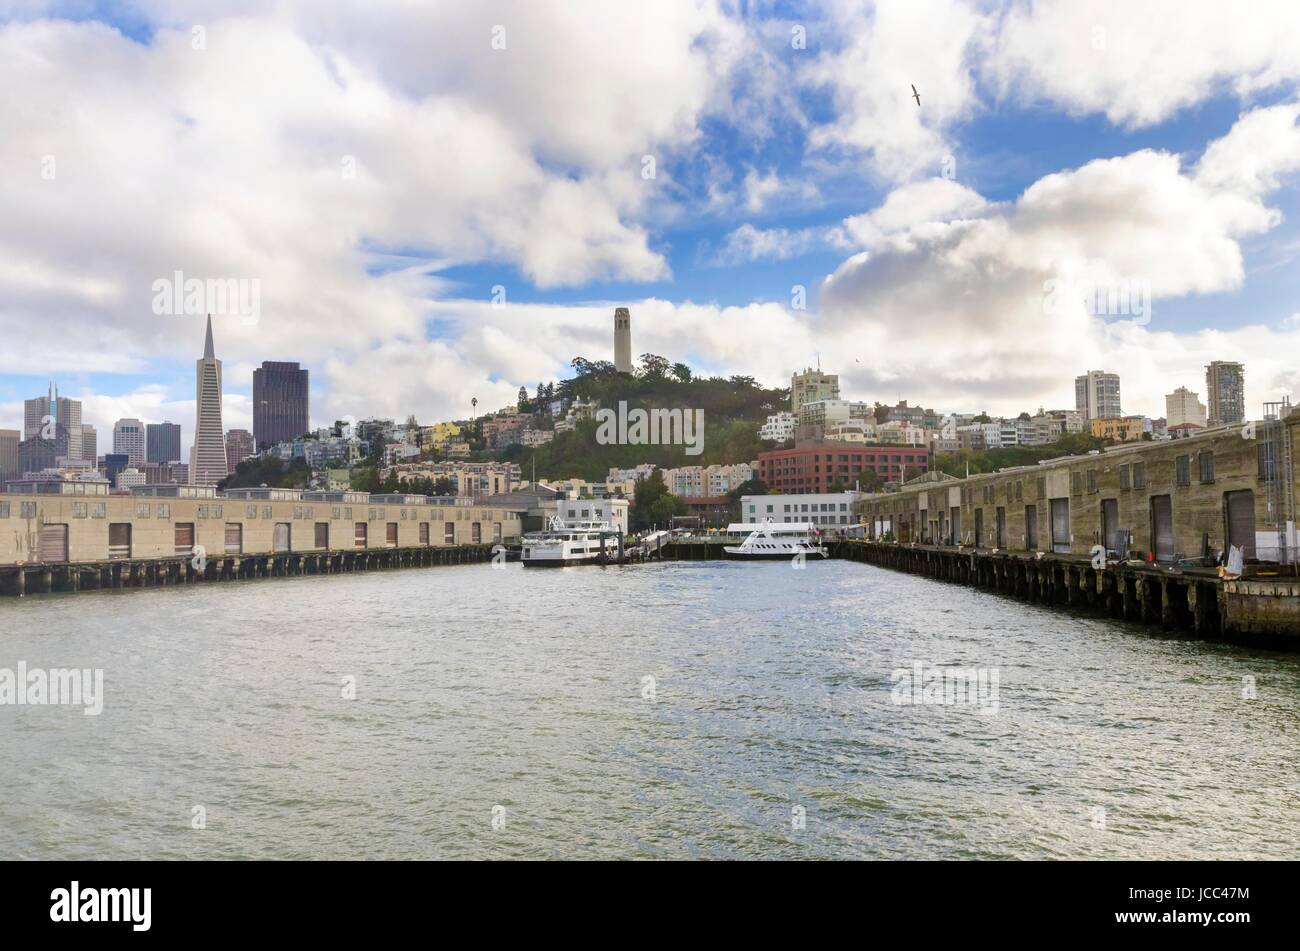 Pier 33 on The Embarcadero at Fisherman's wharf and Coit tower in San Francisco, California, United States. The pier where tourists take the ferry for a cruise to the island of the historic Alcatraz federal prison. Stock Photo